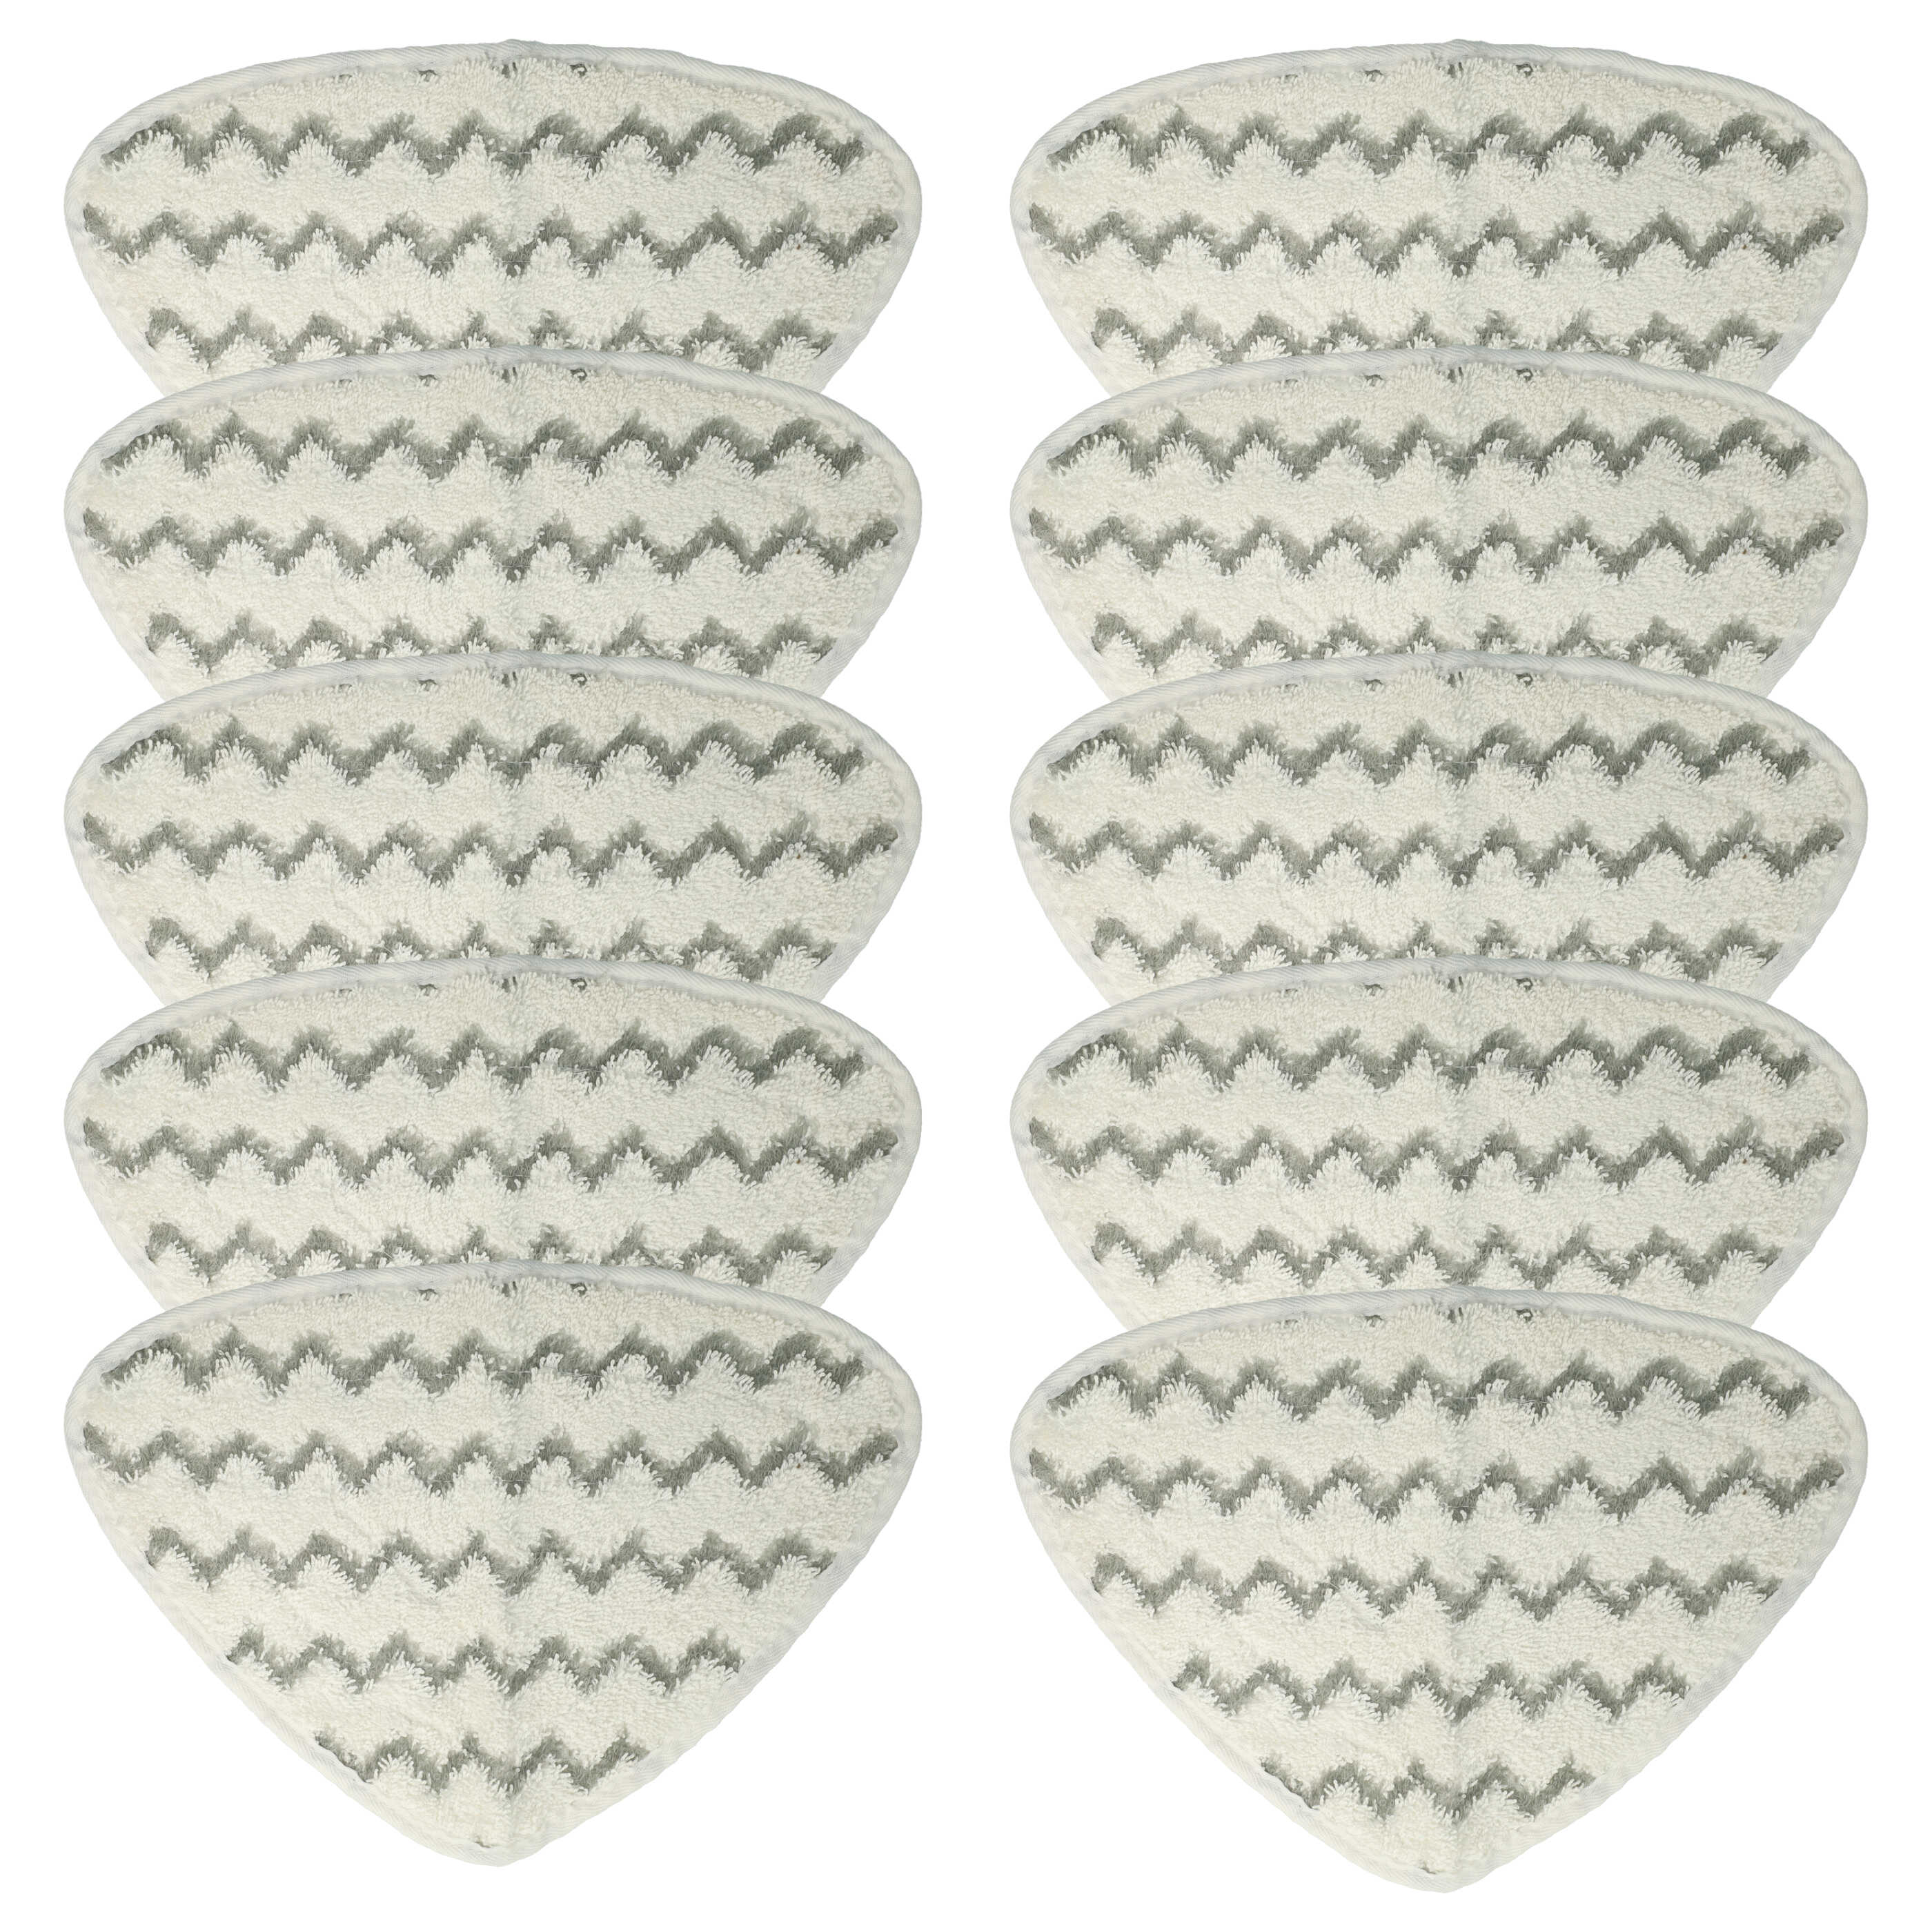 10x Cleaning Pad replaces Vileda 146576 for ViledaHot Spray Steamer, Steam Mop - Microfibre Grey White